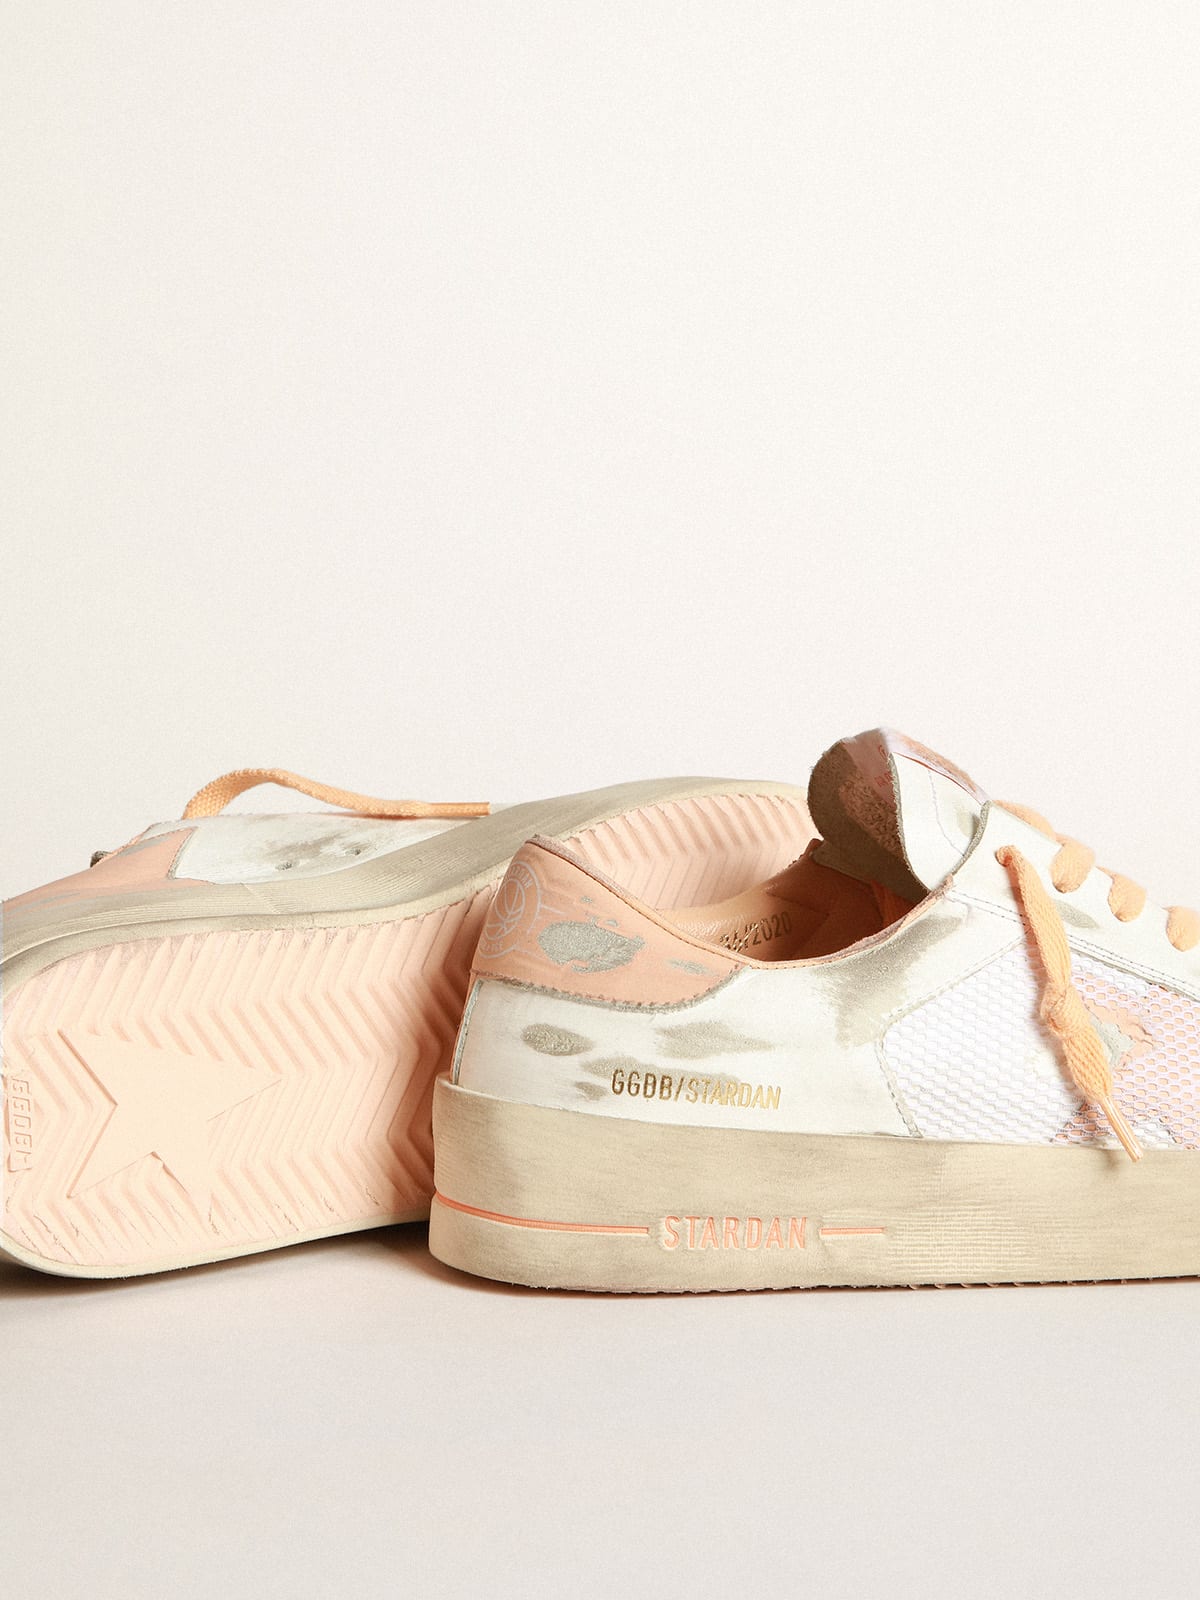 Golden Goose - Stardan sneakers in white leather and mesh with peach-pink leather star and heel tab in 